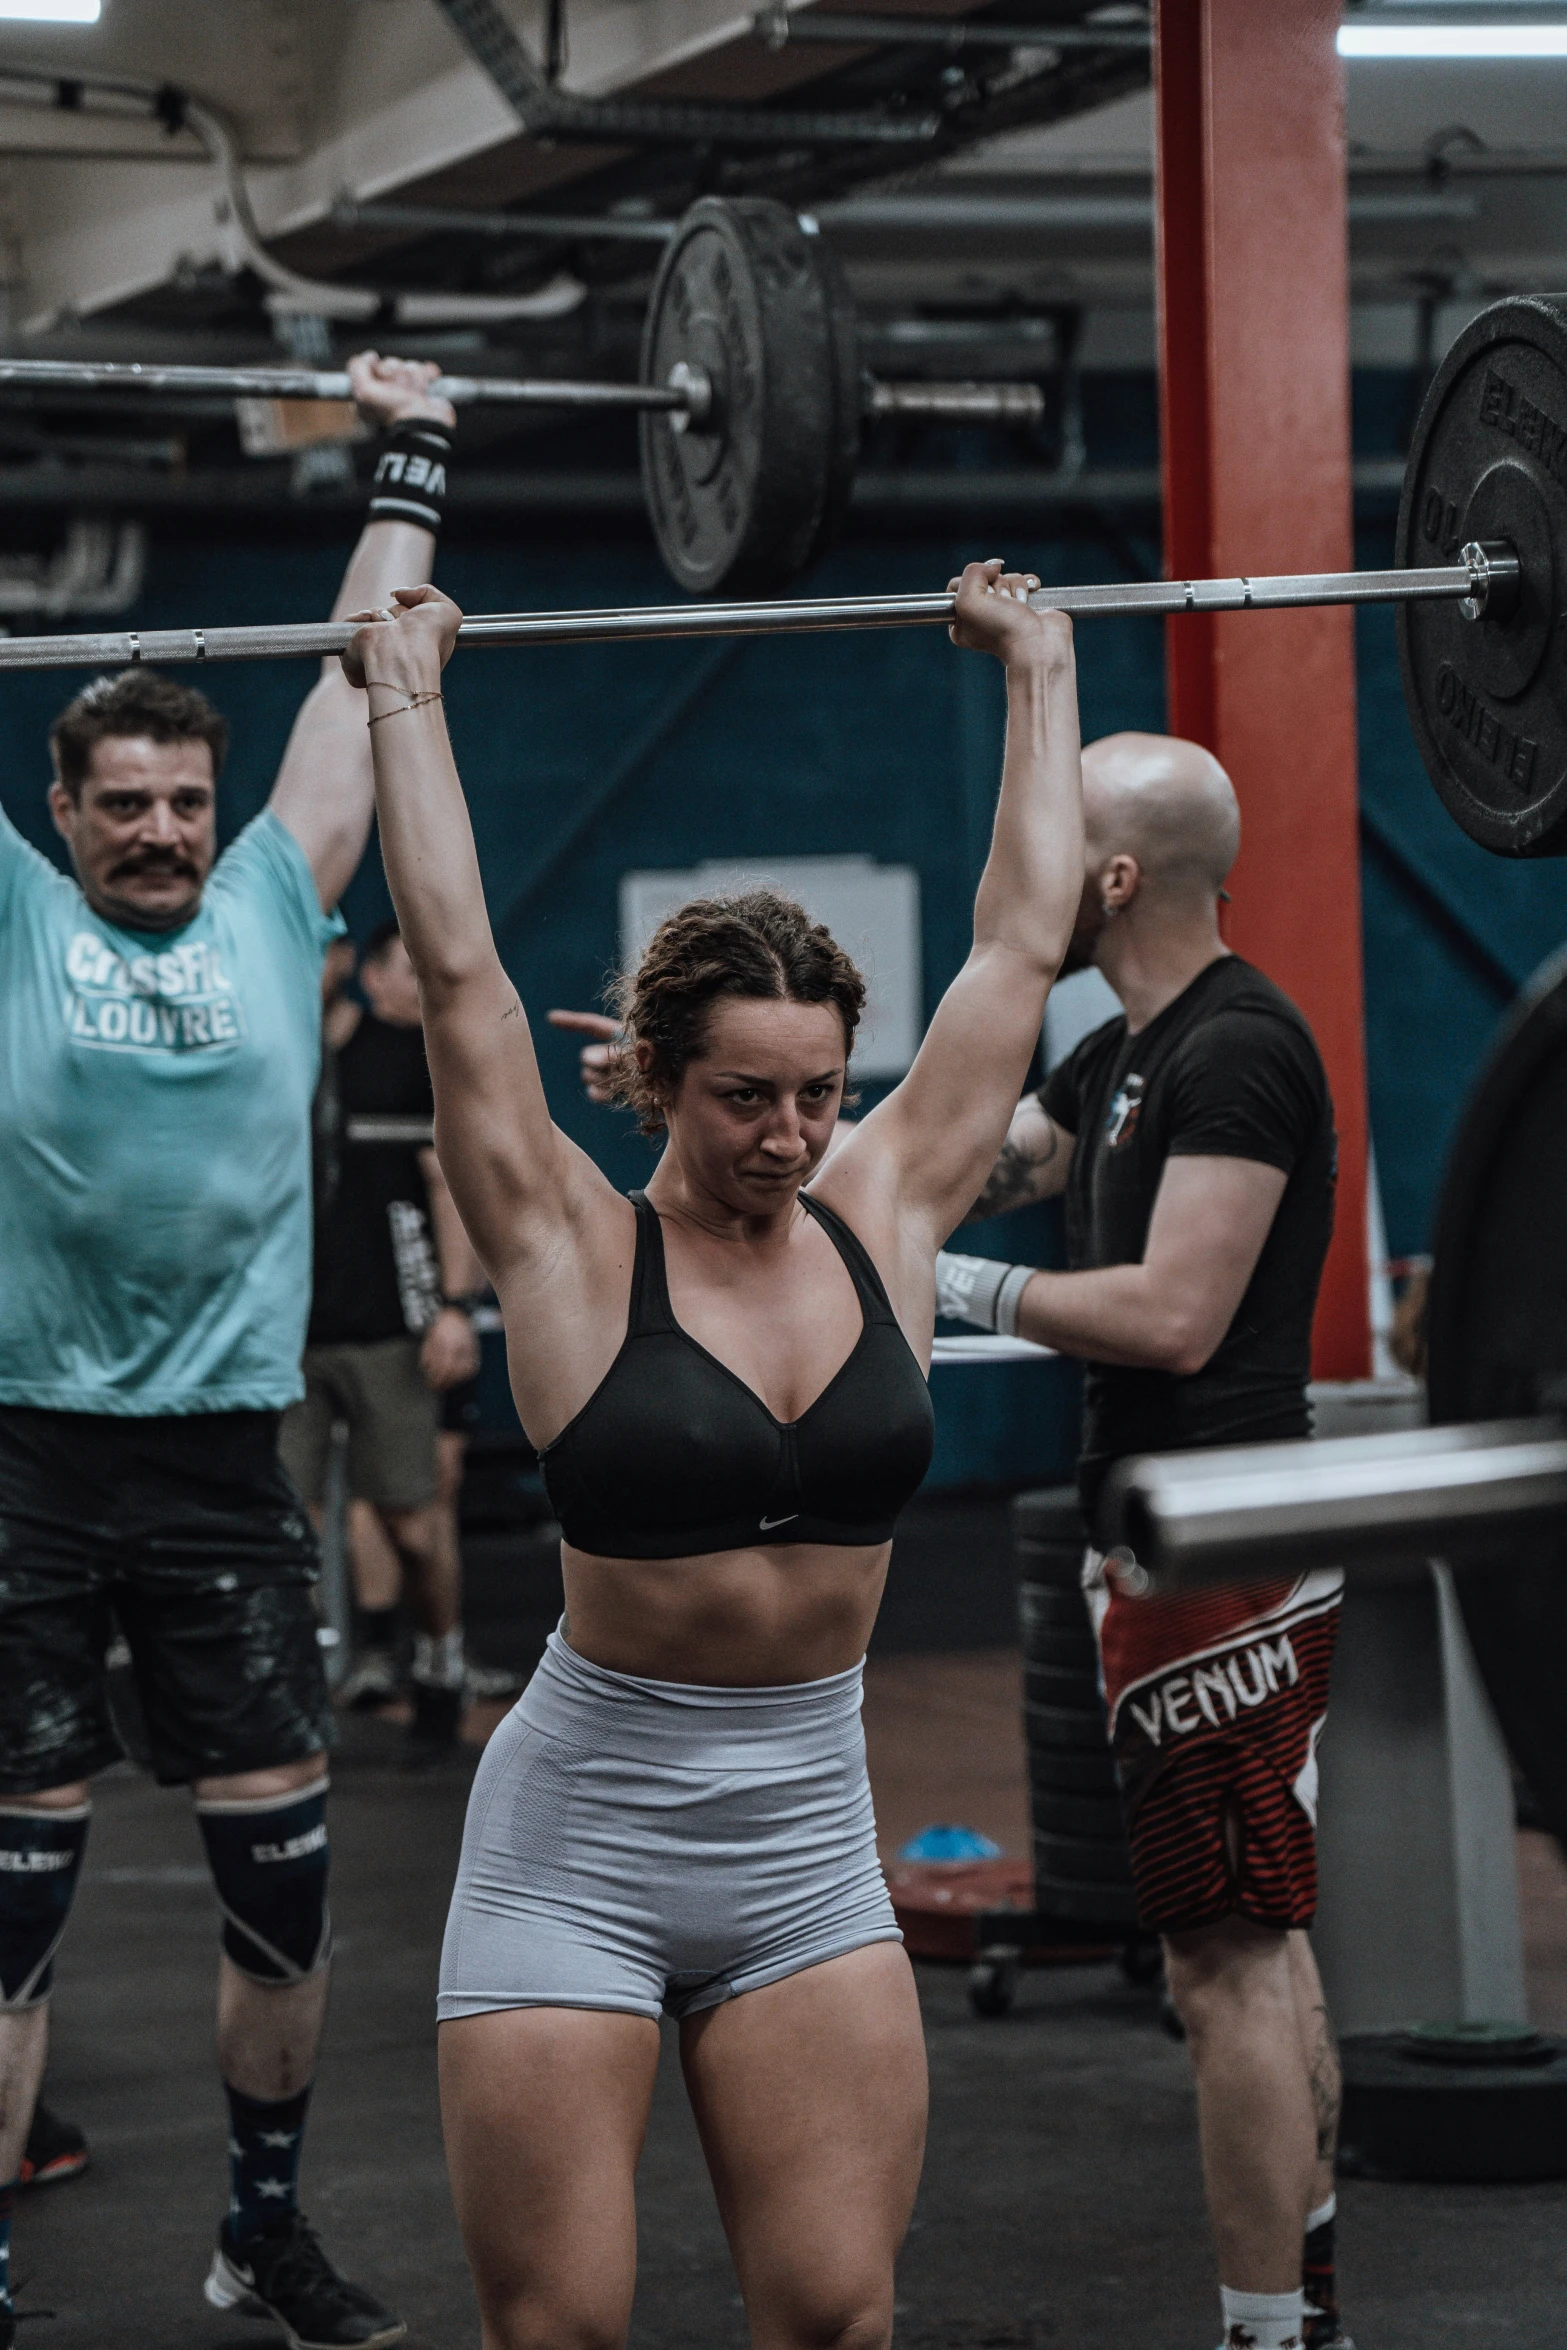 a women lifts the barbell in the gym